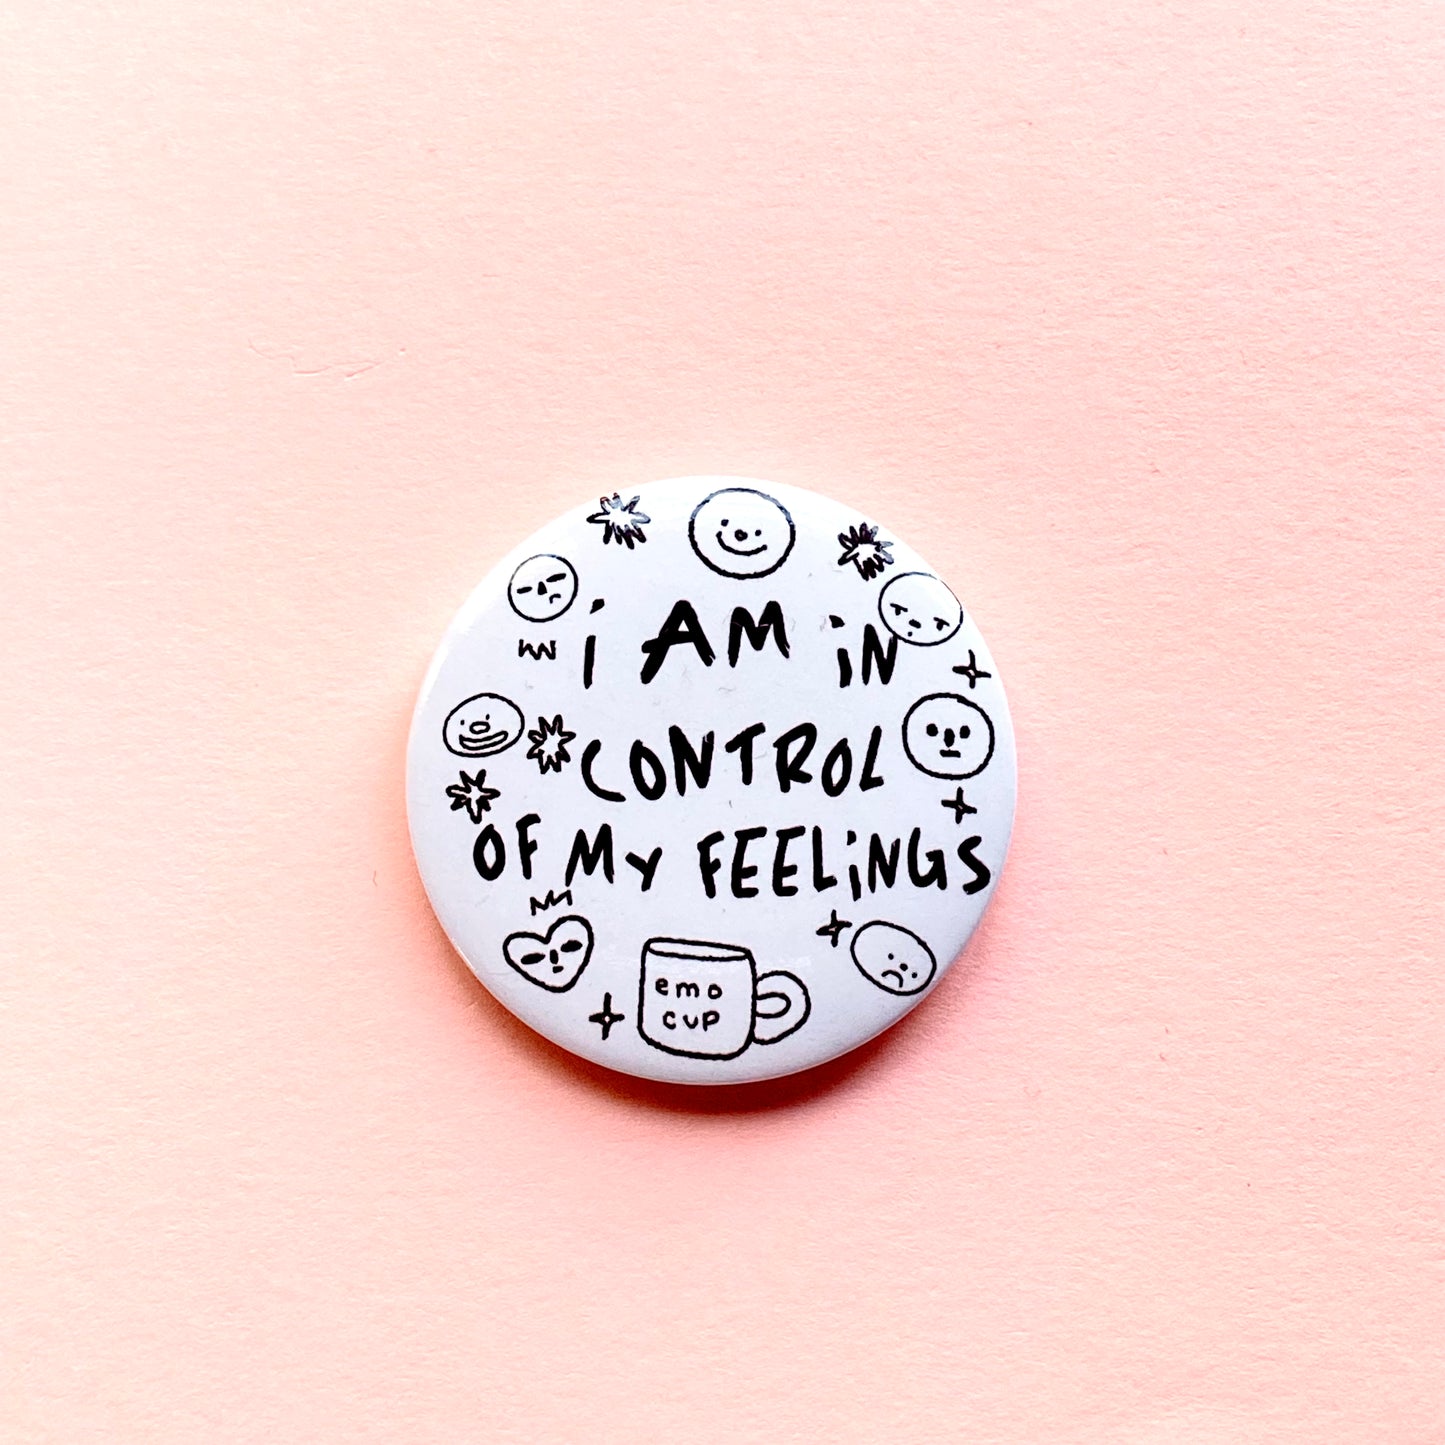 affirmation rounded button pins